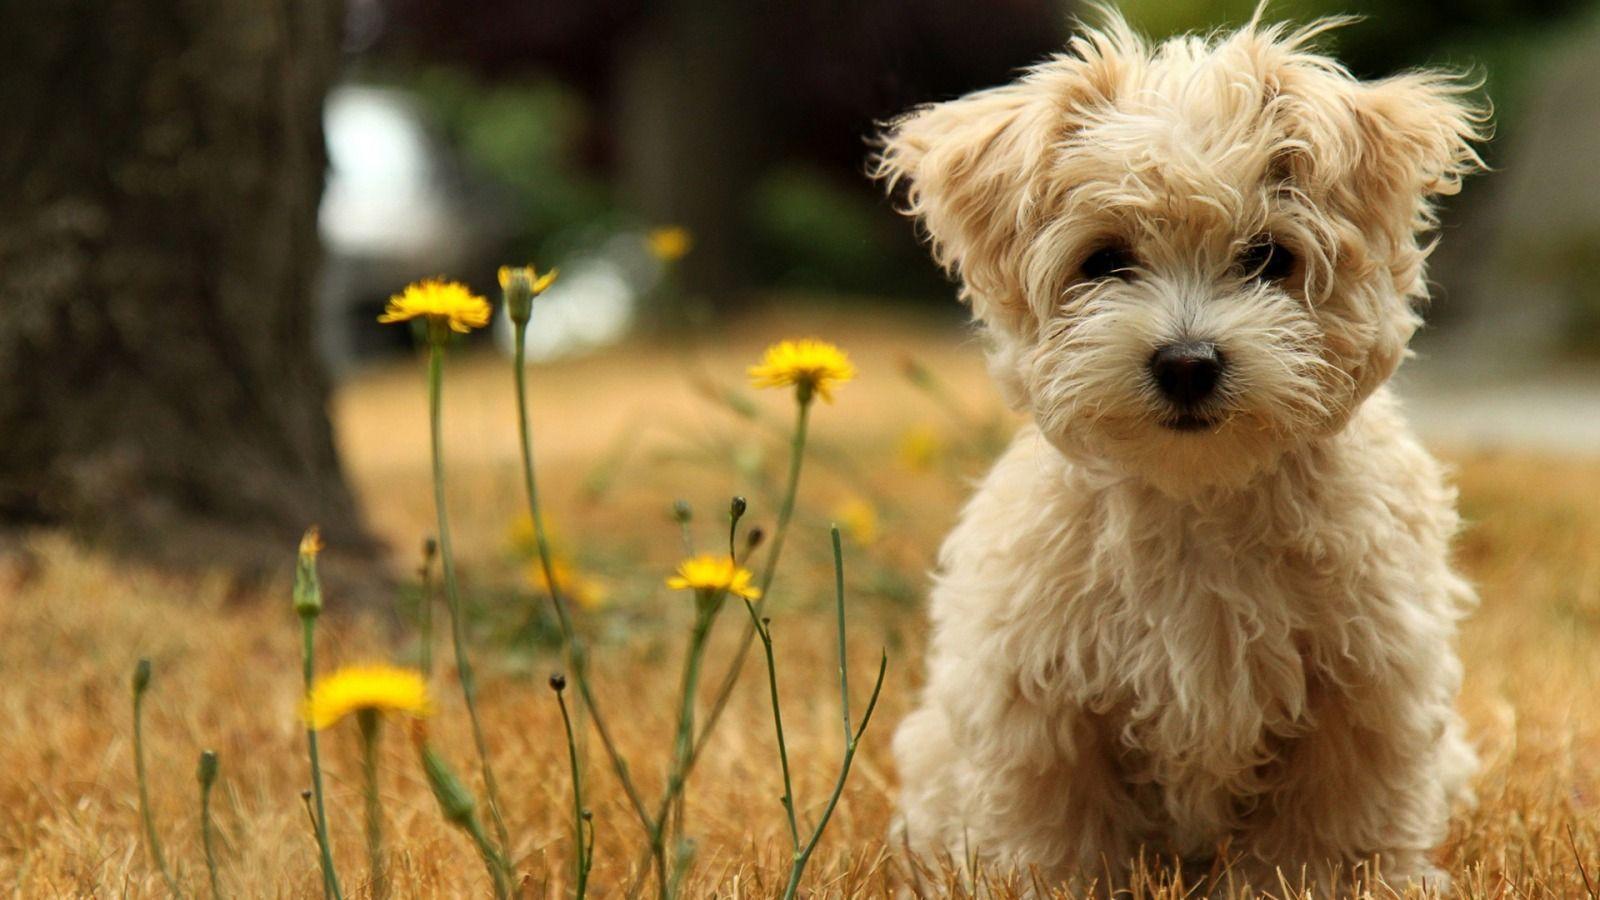 Online Wallpapers Shop: Cute Puppy Pictures, Puppy 